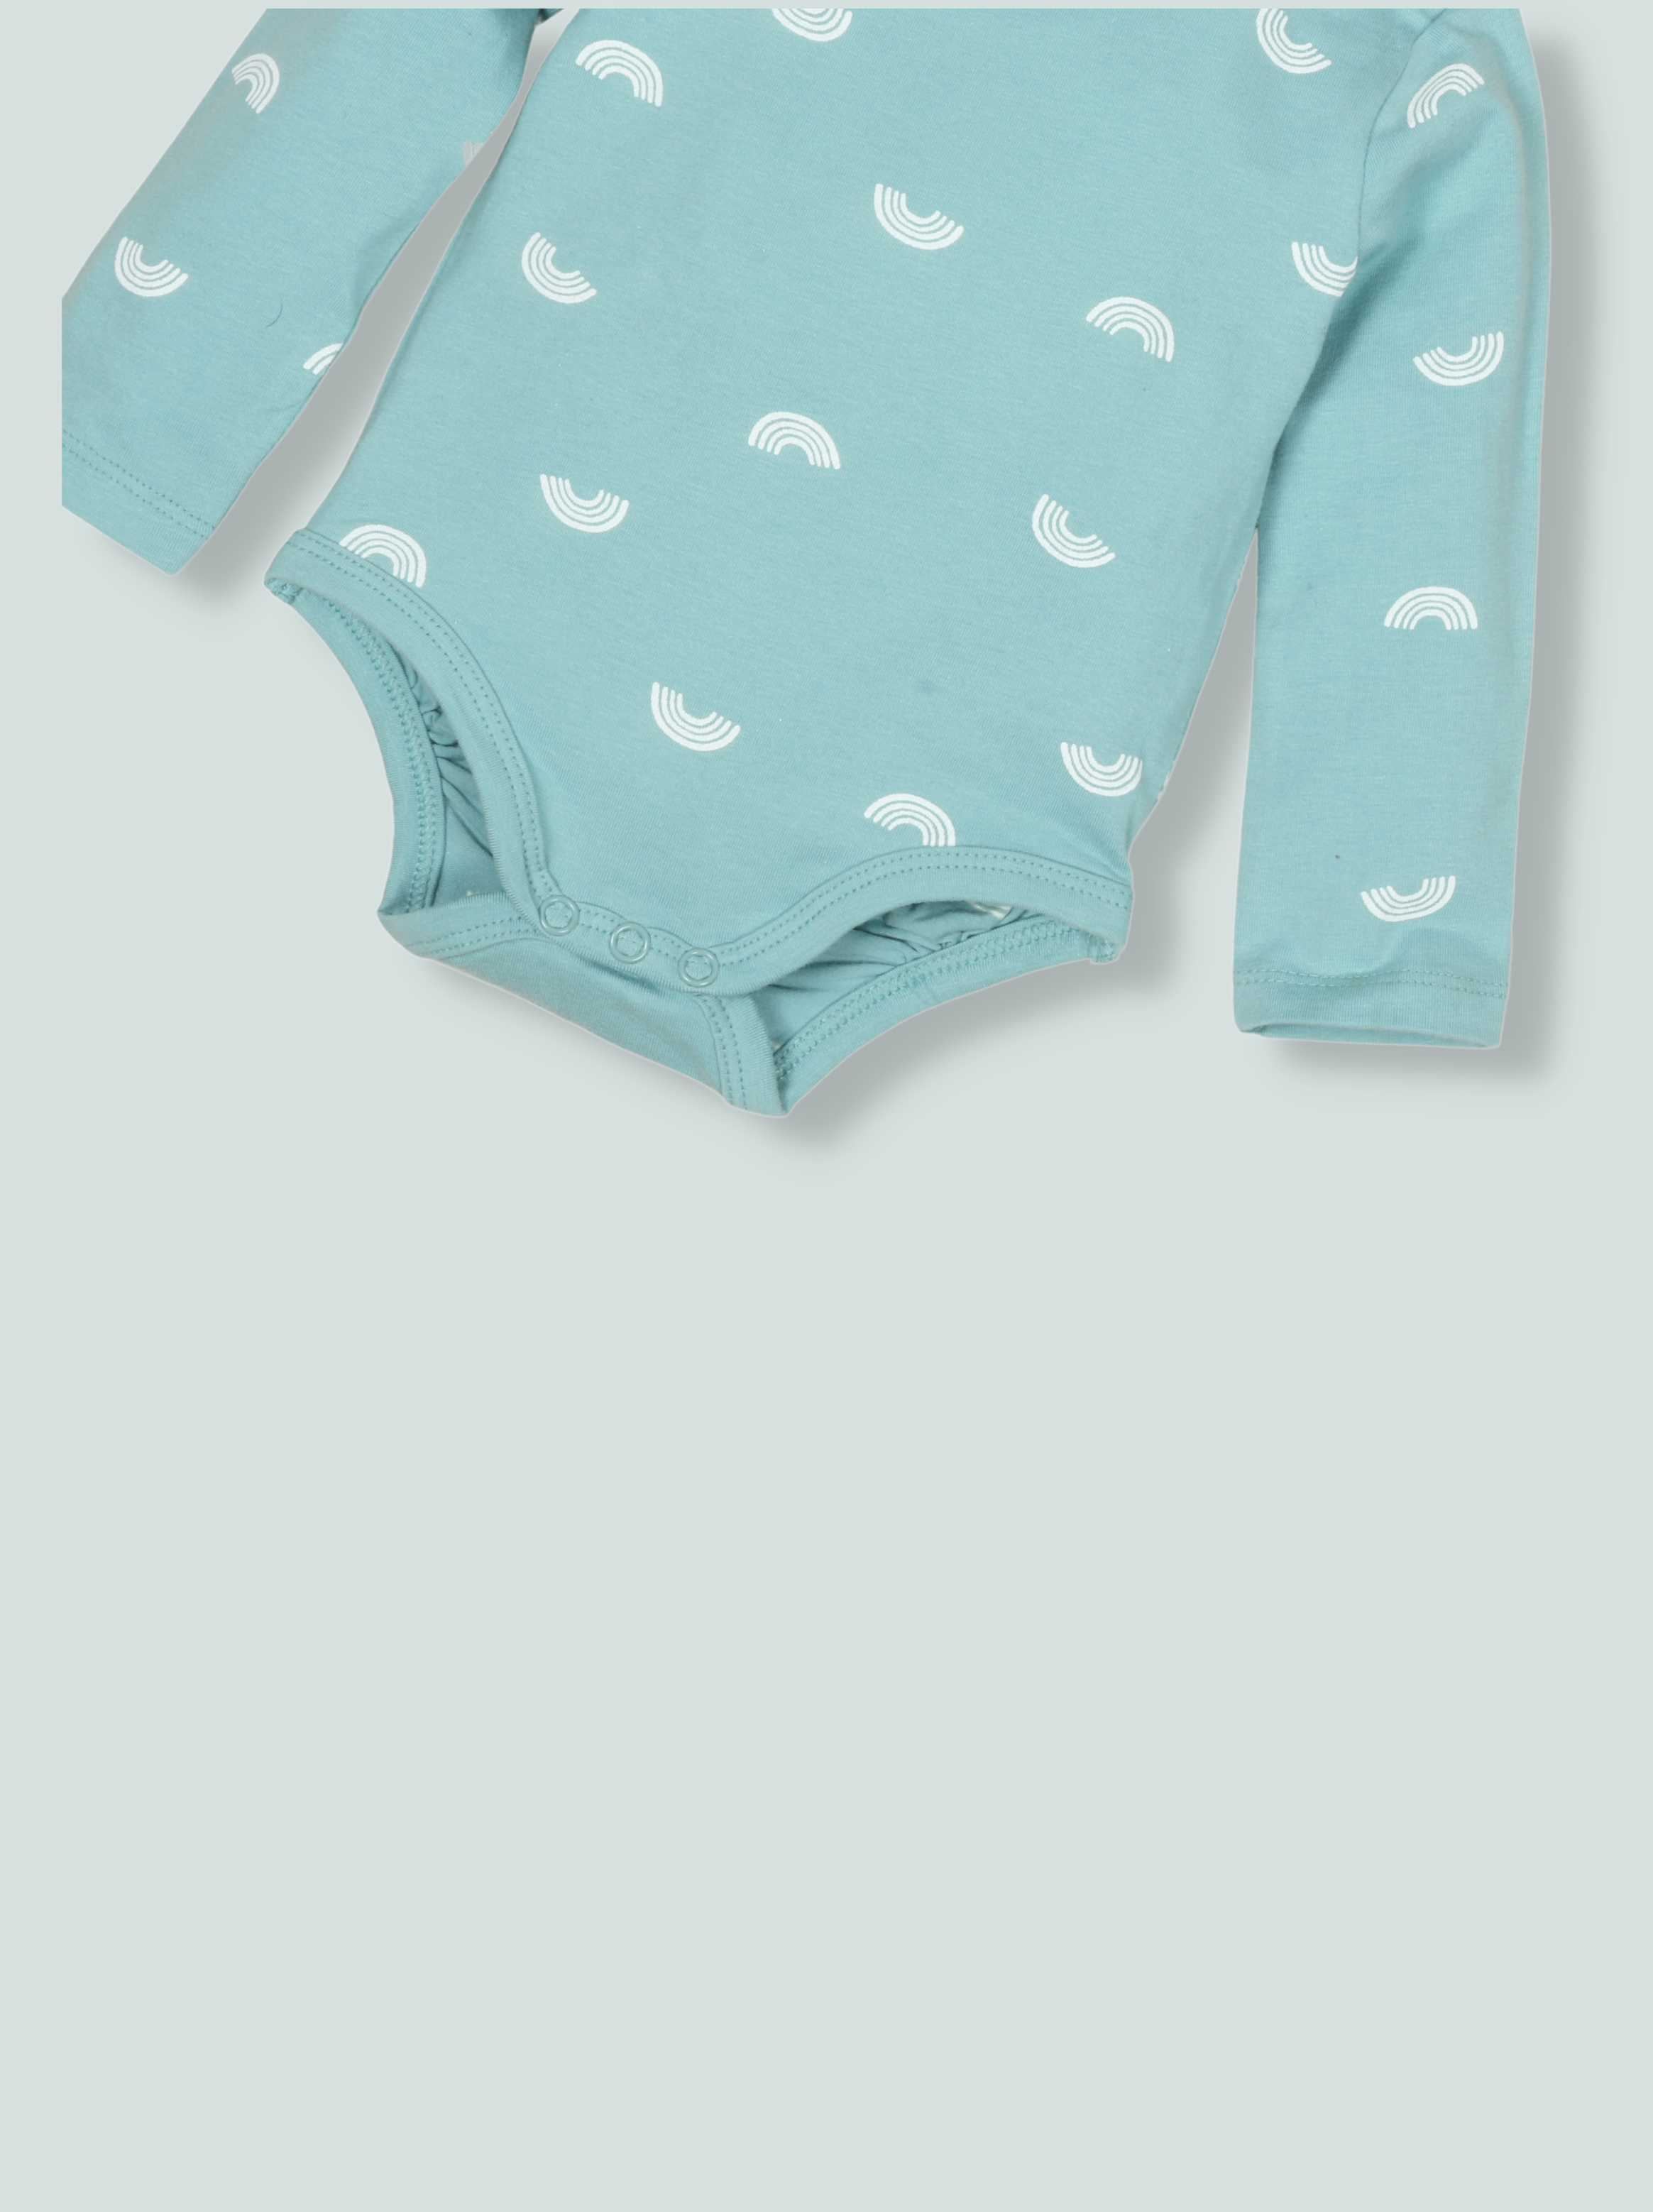 Babies Blue Full Sleeve Printed Soft Cotton Romper